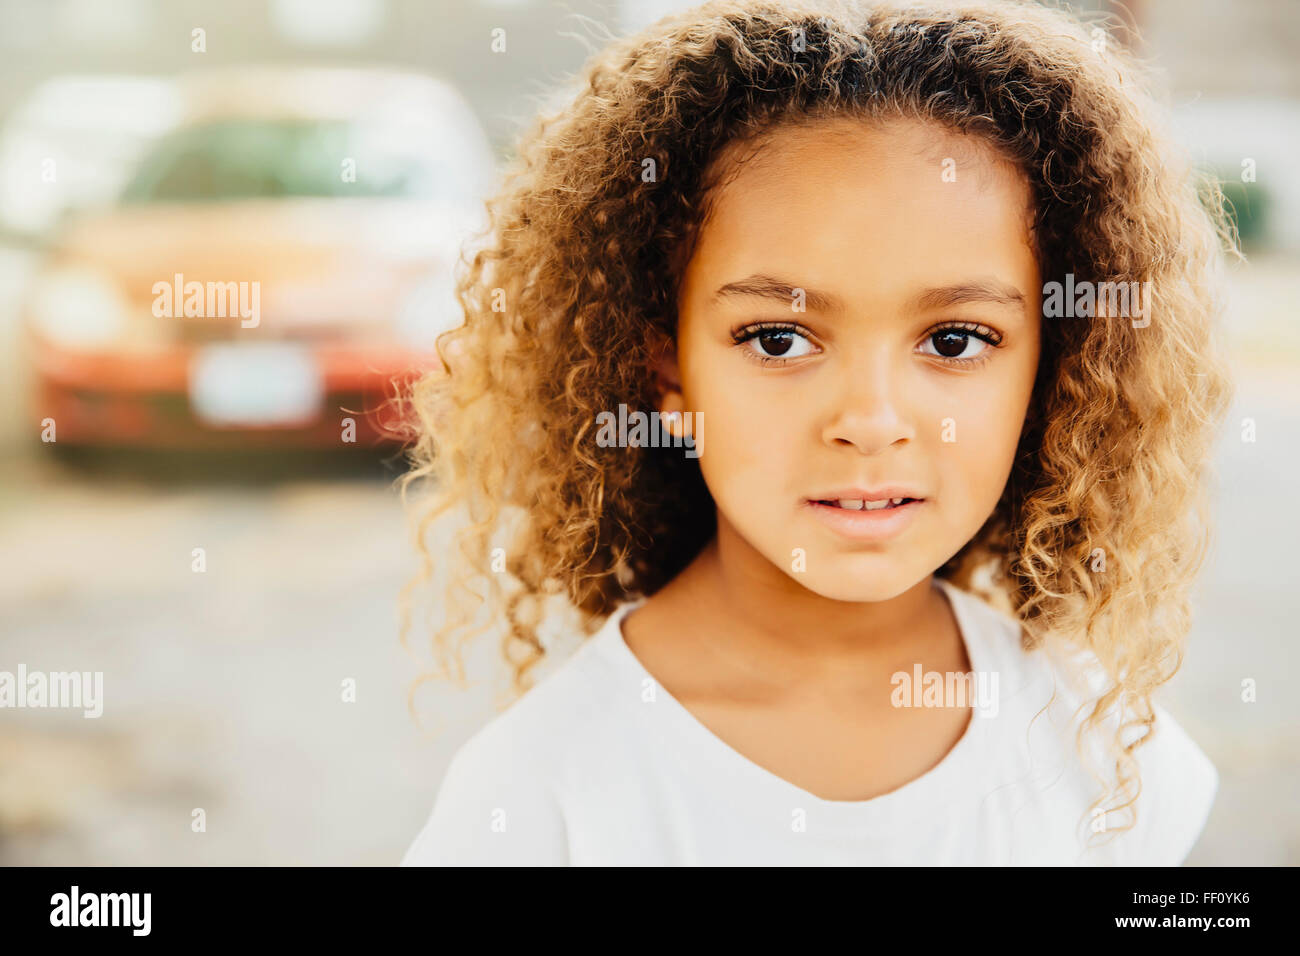 Mixed Race girl with serious expression Banque D'Images